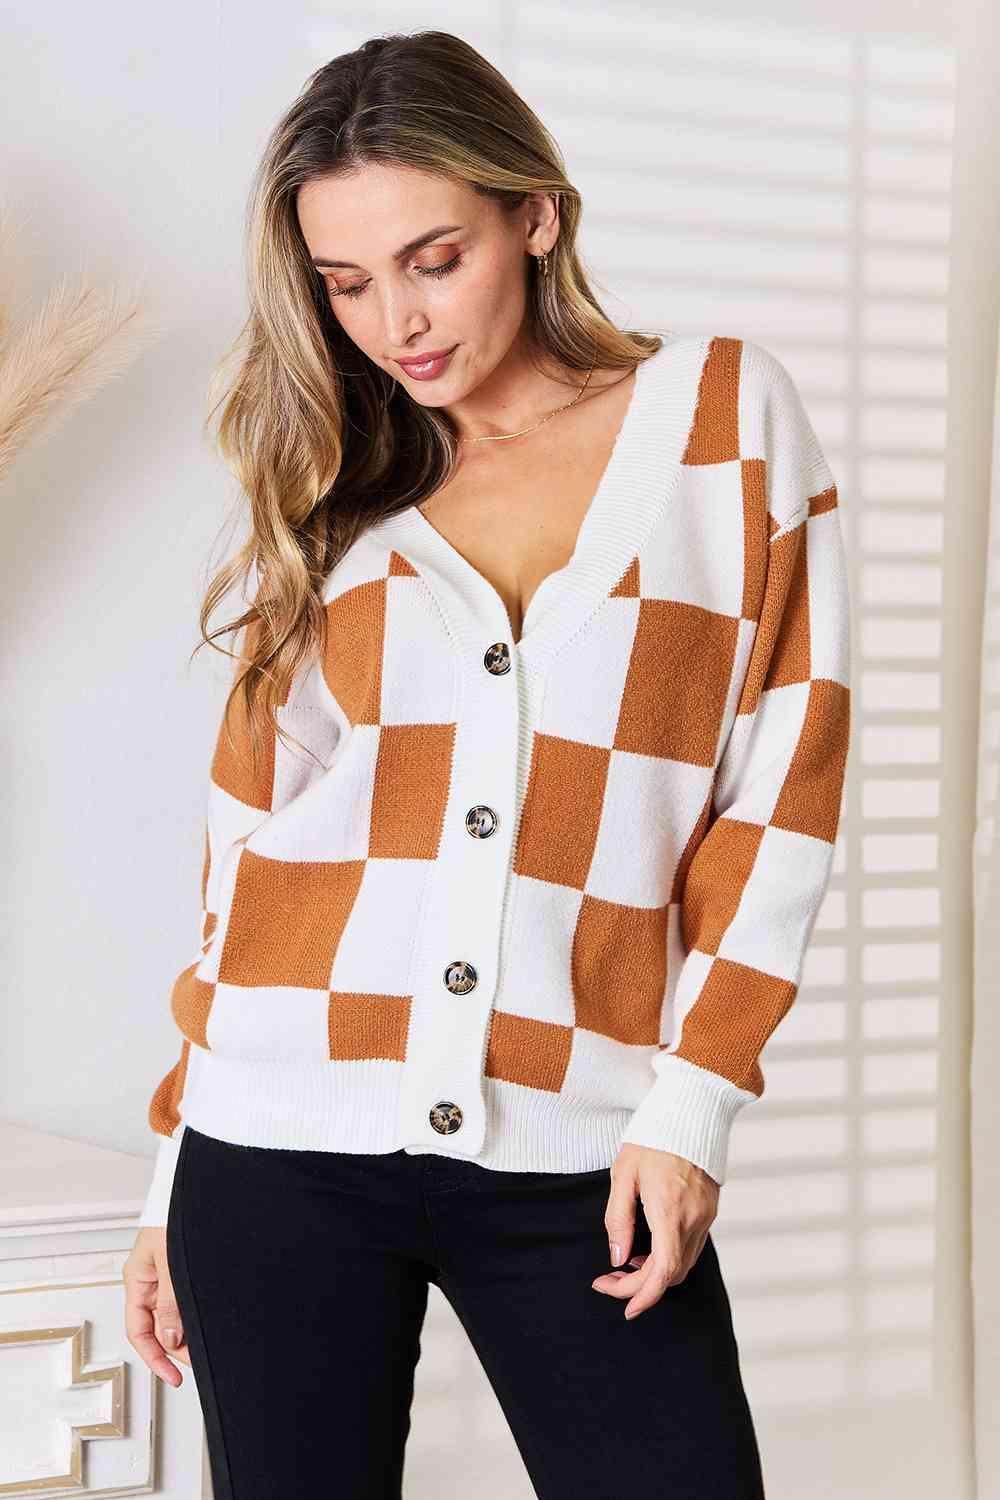 Women's Sweaters - Cardigans Double Take Button-Up V-Neck Dropped Shoulder Cardigan